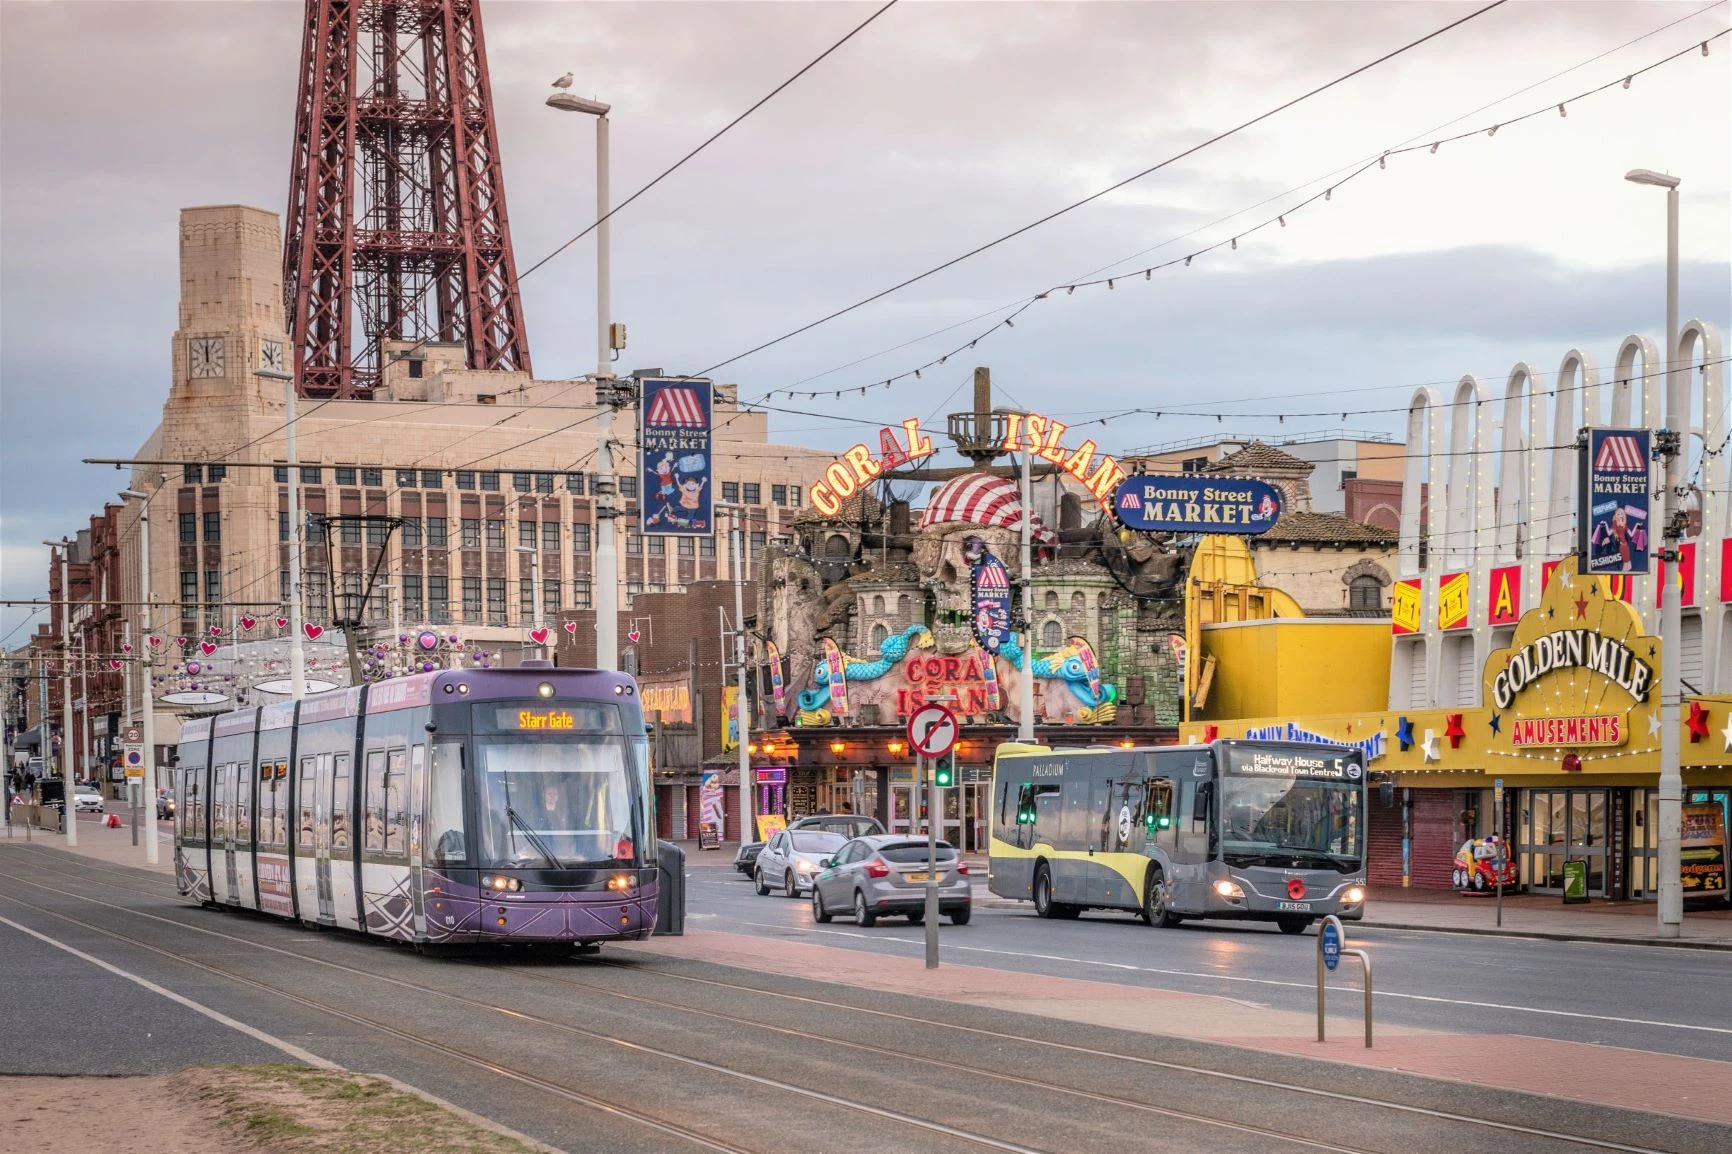 Trams and buses in Blackpool